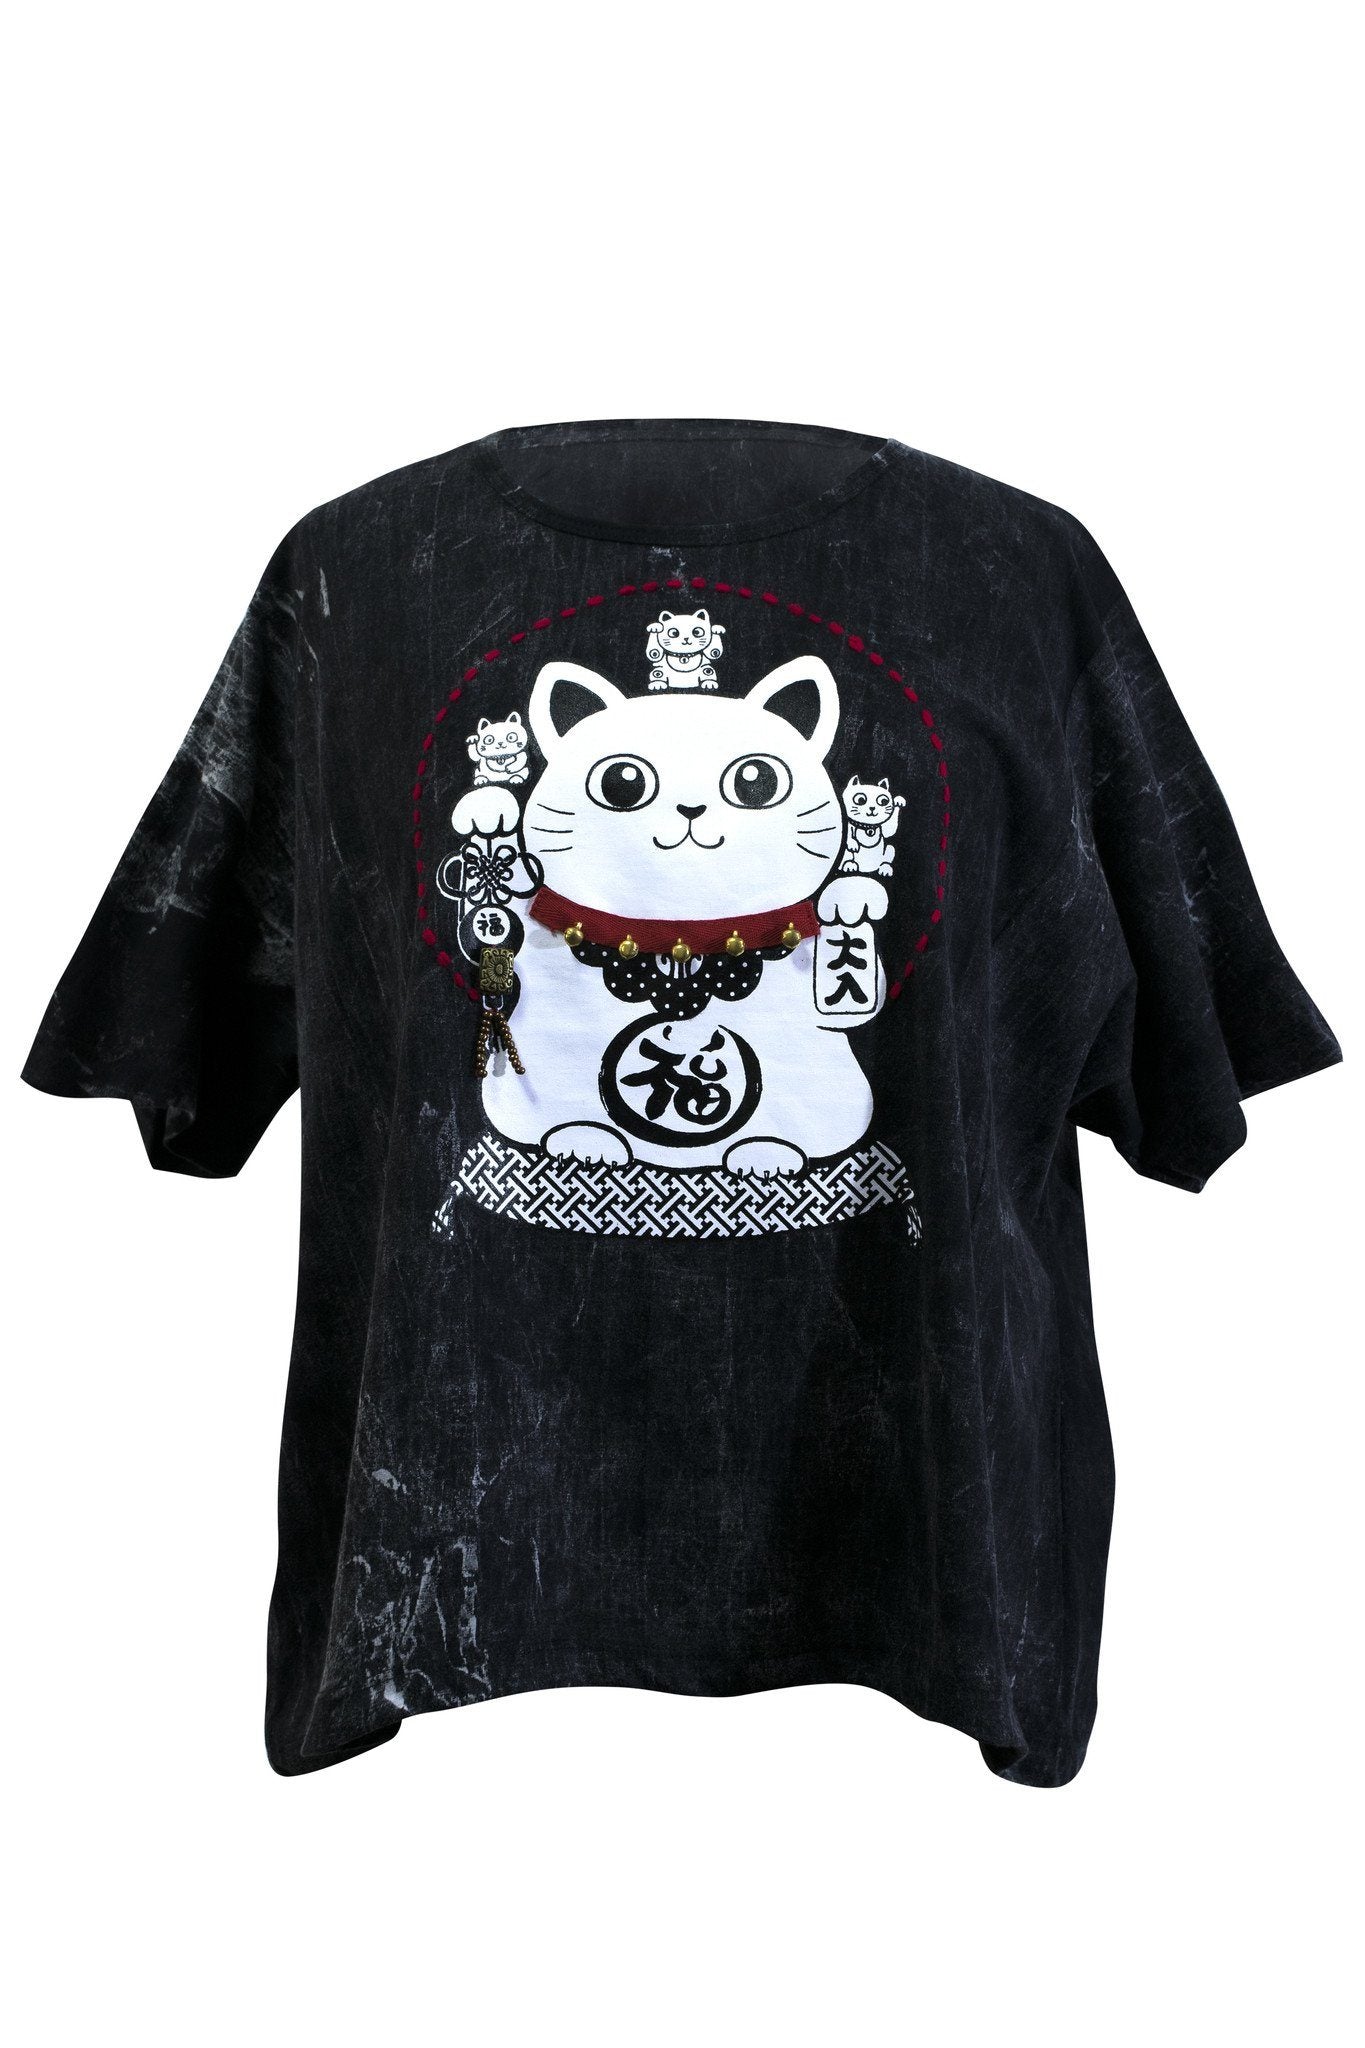 T-Shirt Animal Printed Embroidery Dye cotton - CCCollections